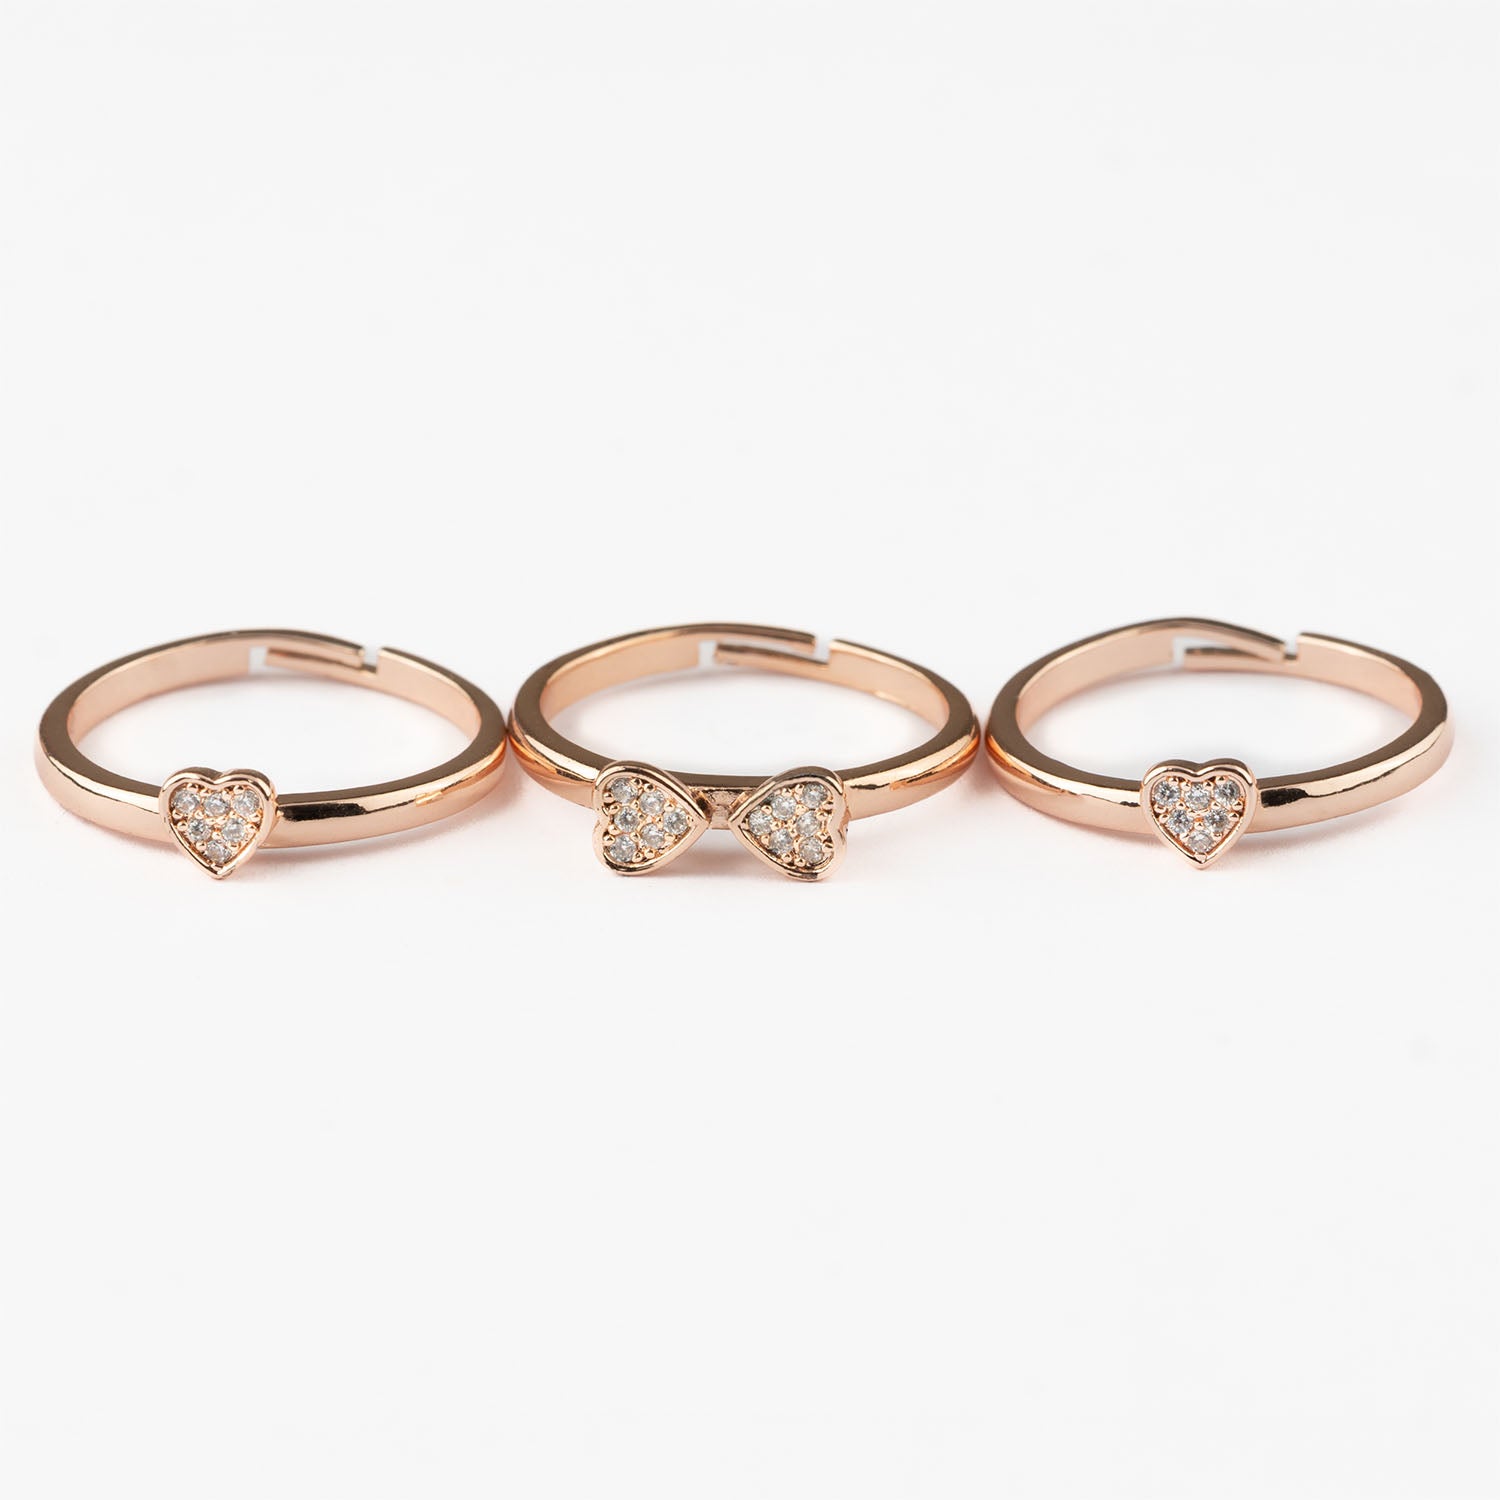 W Premium Jewellery Rose Gold Clover Heart Rings (Pack Of 3)